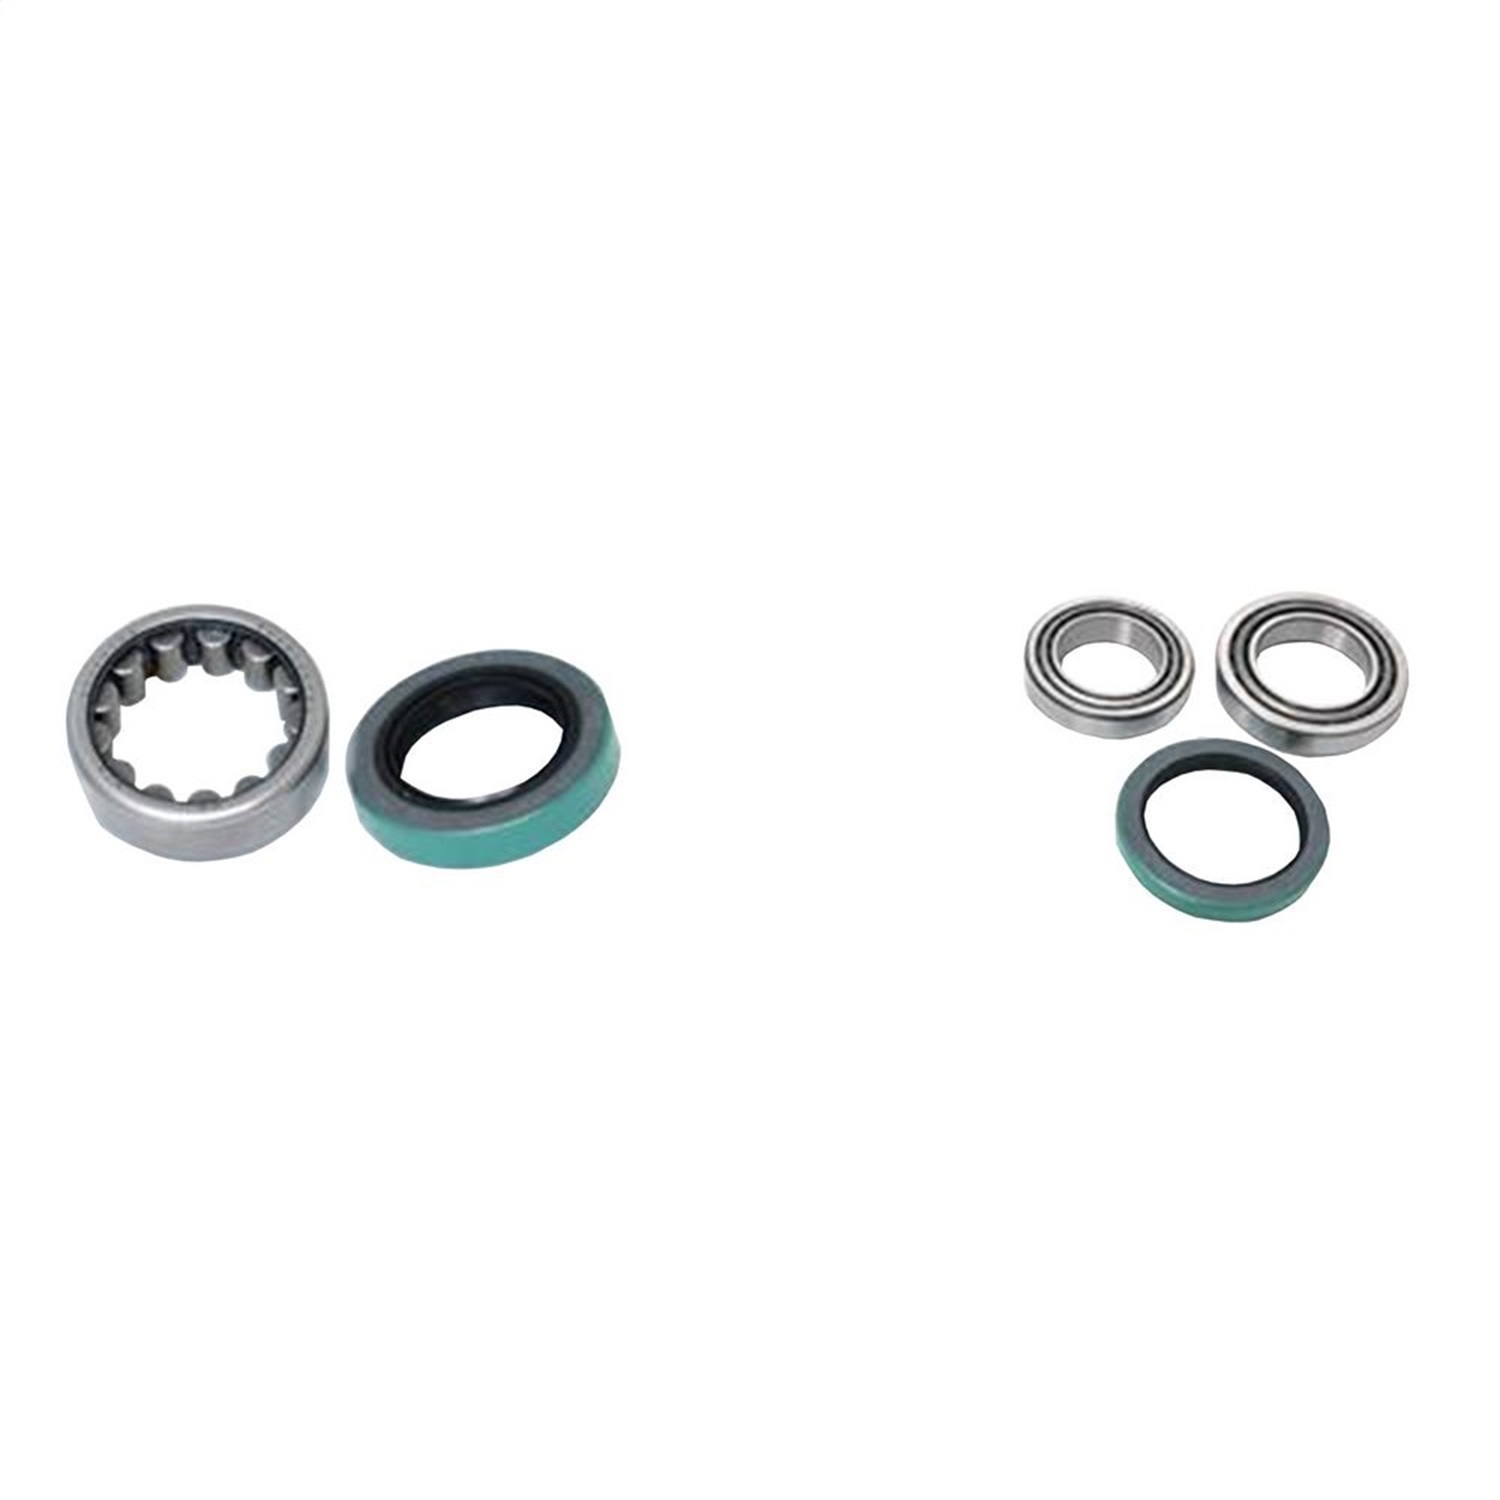 G2 Axle and Gear G2 Axle and Gear 30-9000 Wheel Bearing Kit